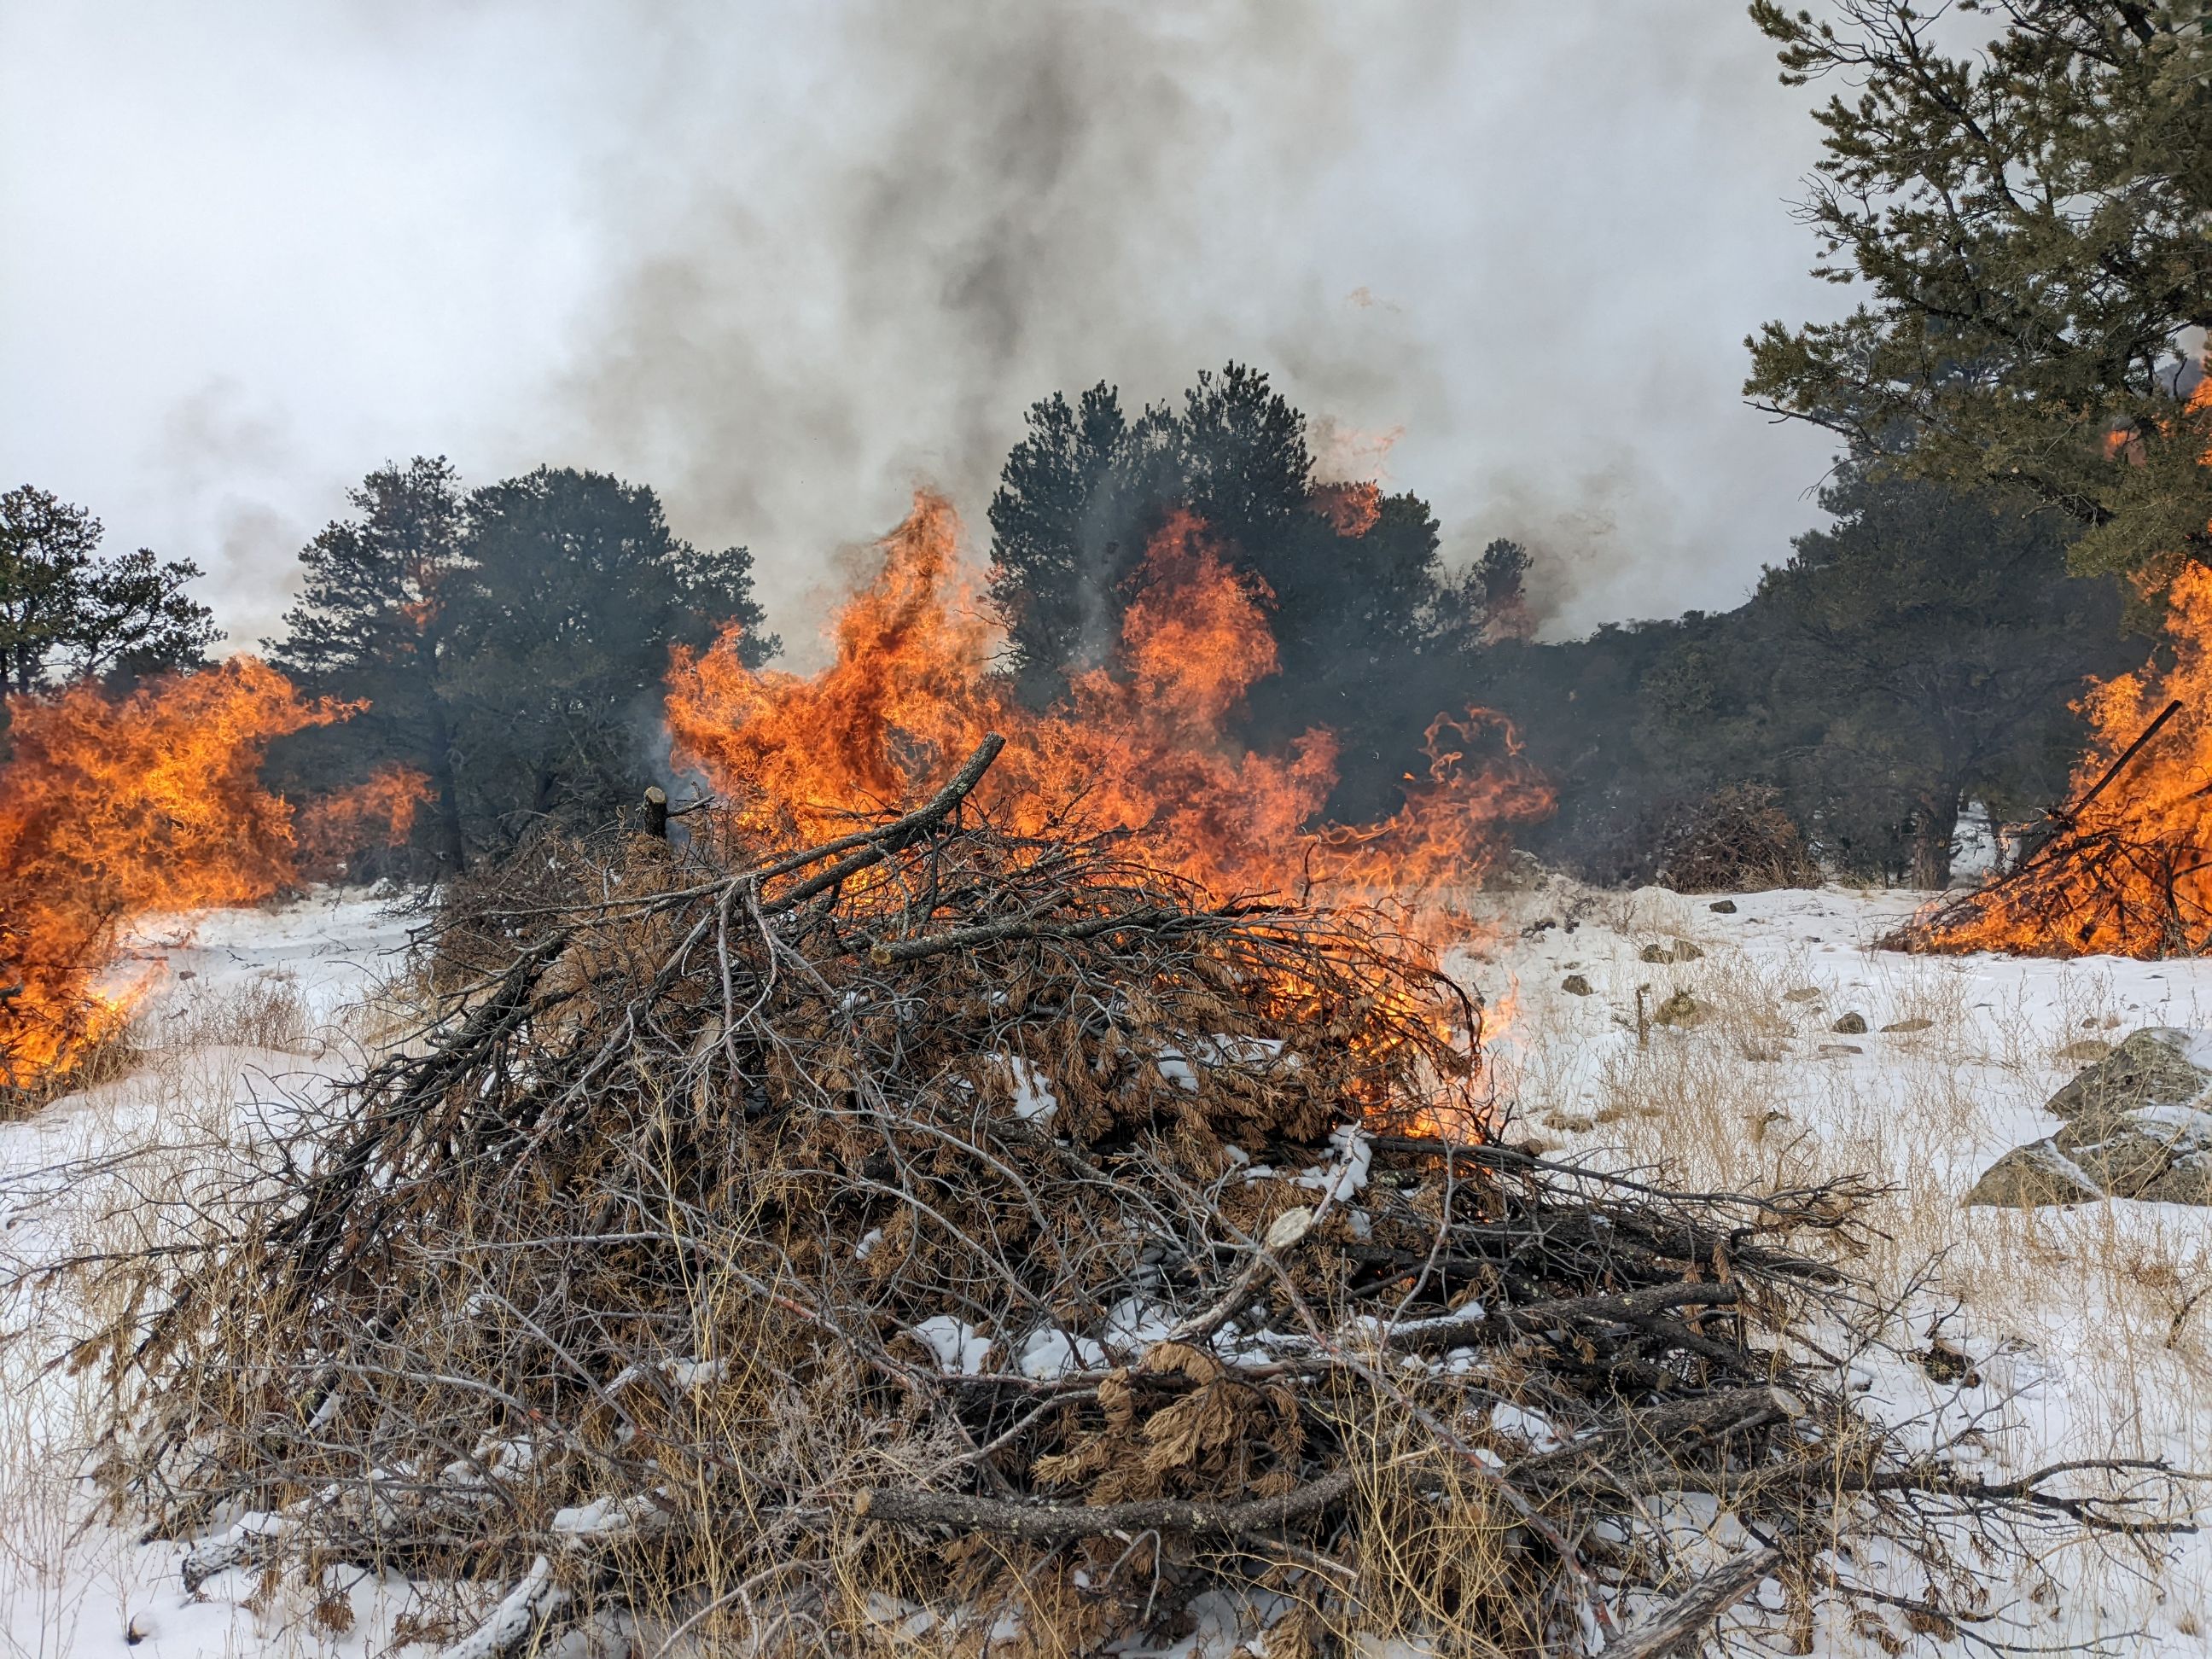 A pile of branches is piled and burning in the snow